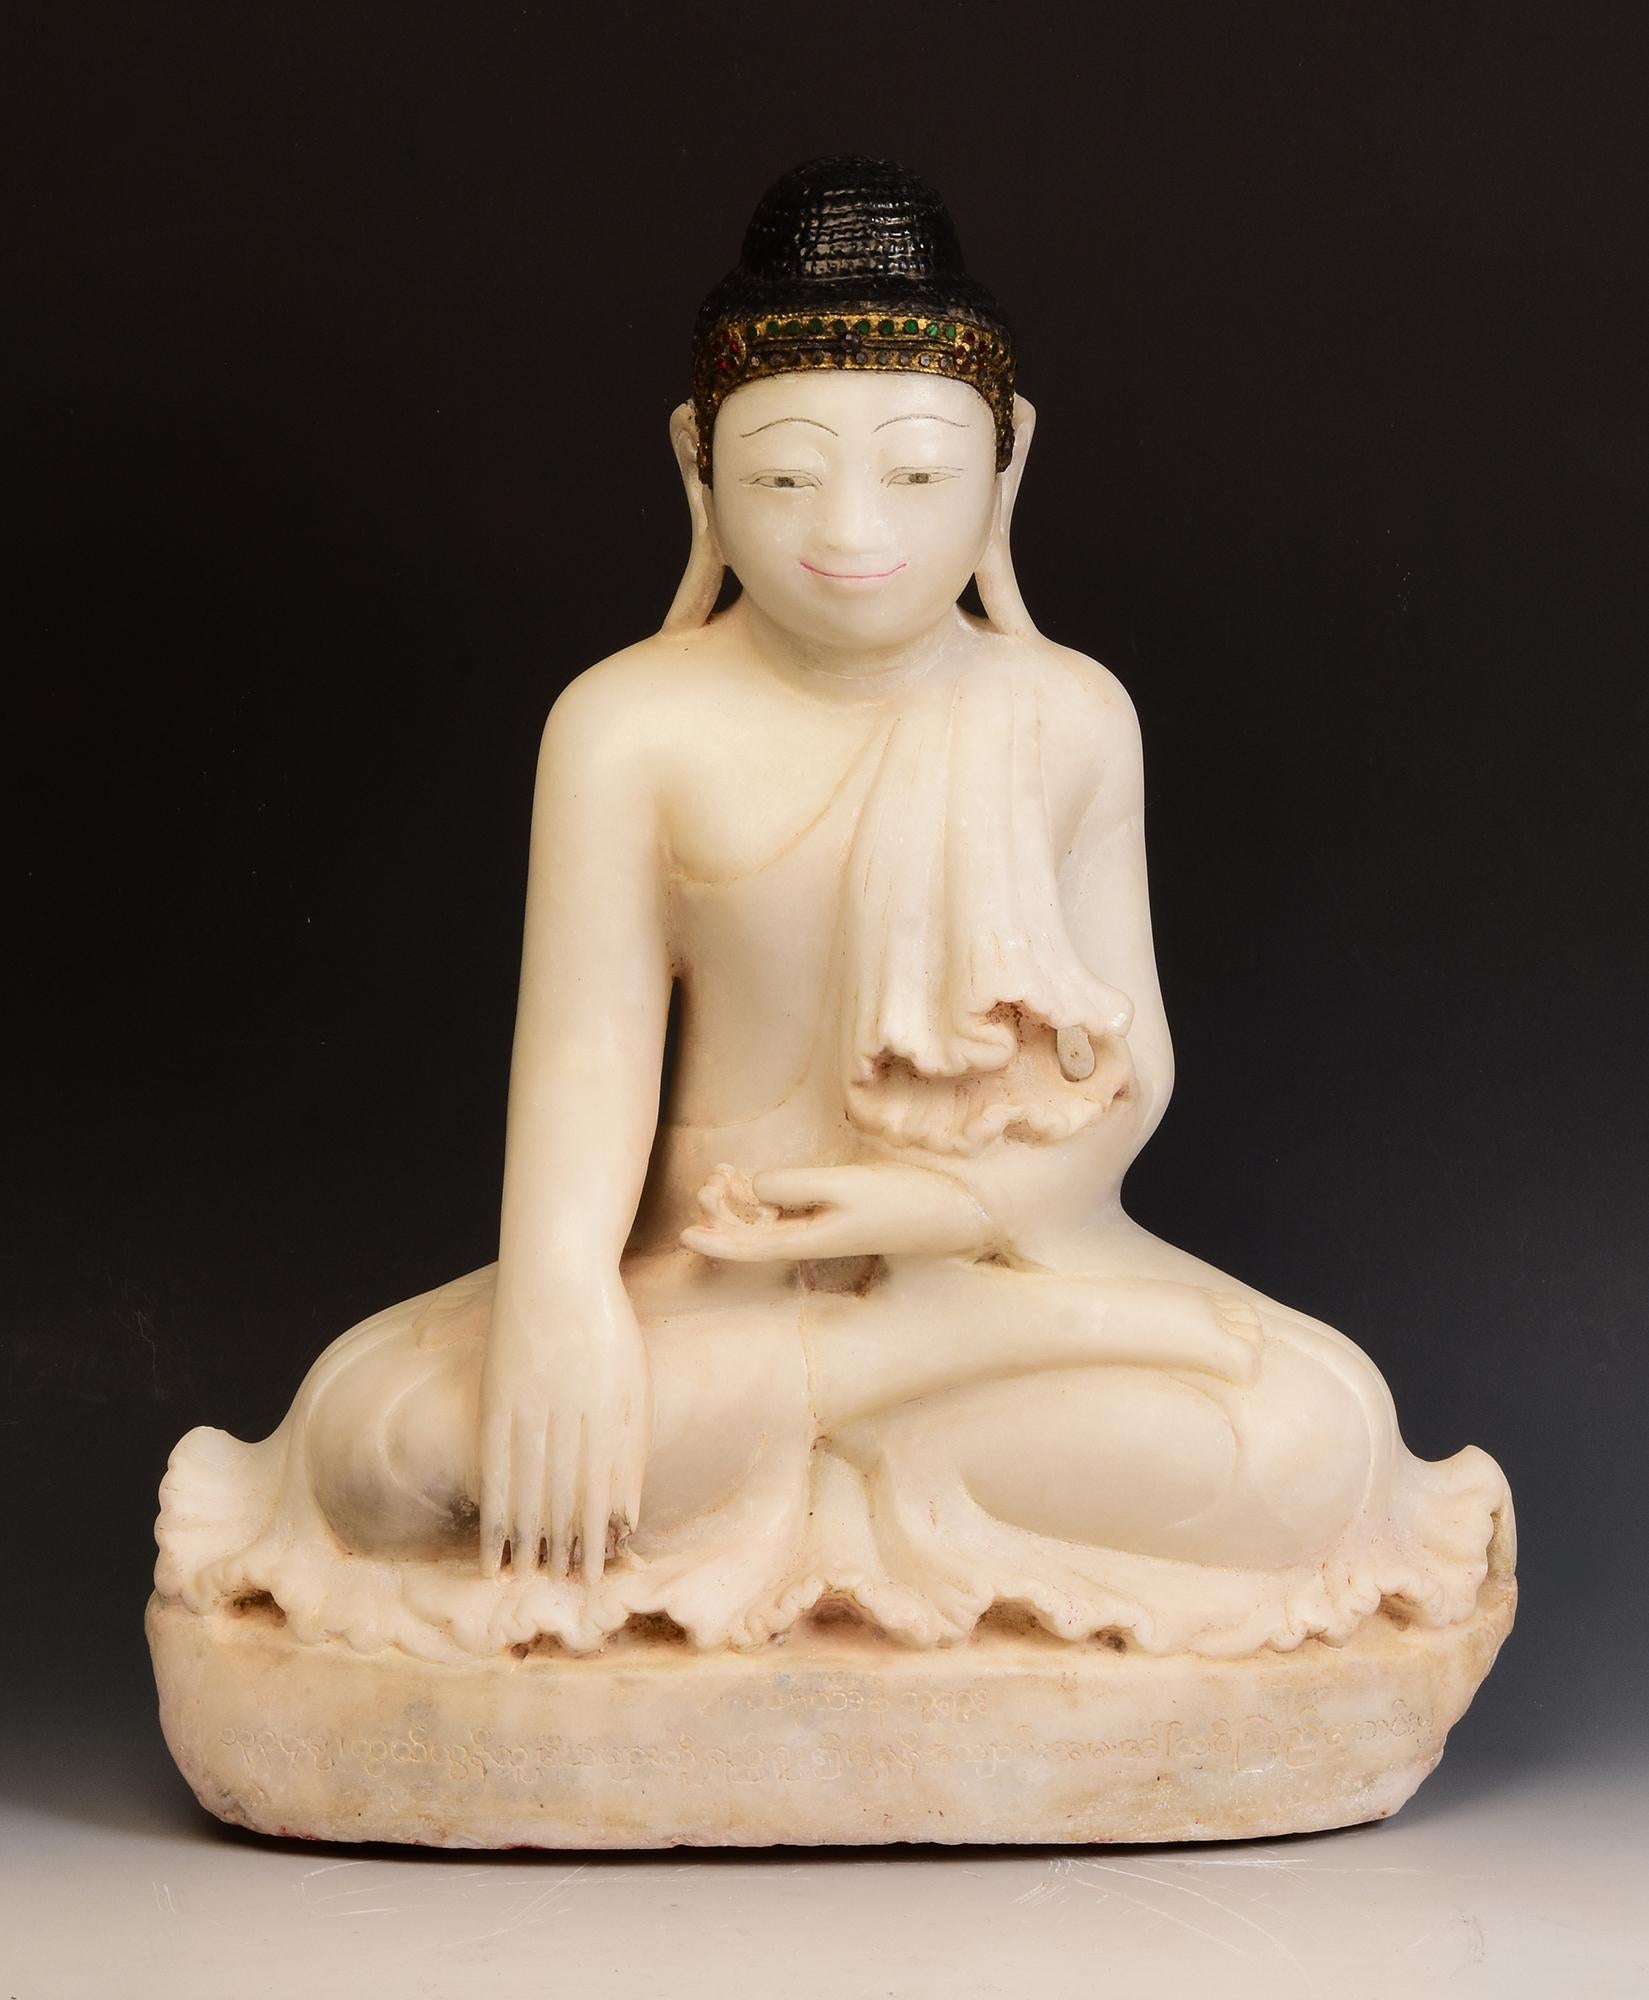 Antique Burmese alabaster Buddha sitting in Mara Vijaya (calling the earth to witness) posture on a base, with inlay of colorful glass pieces on the headband.

Age: Burma, Mandalay Period, 19th Century
Size: Height 53 C.M. / Width 44.5 C.M. / Depth